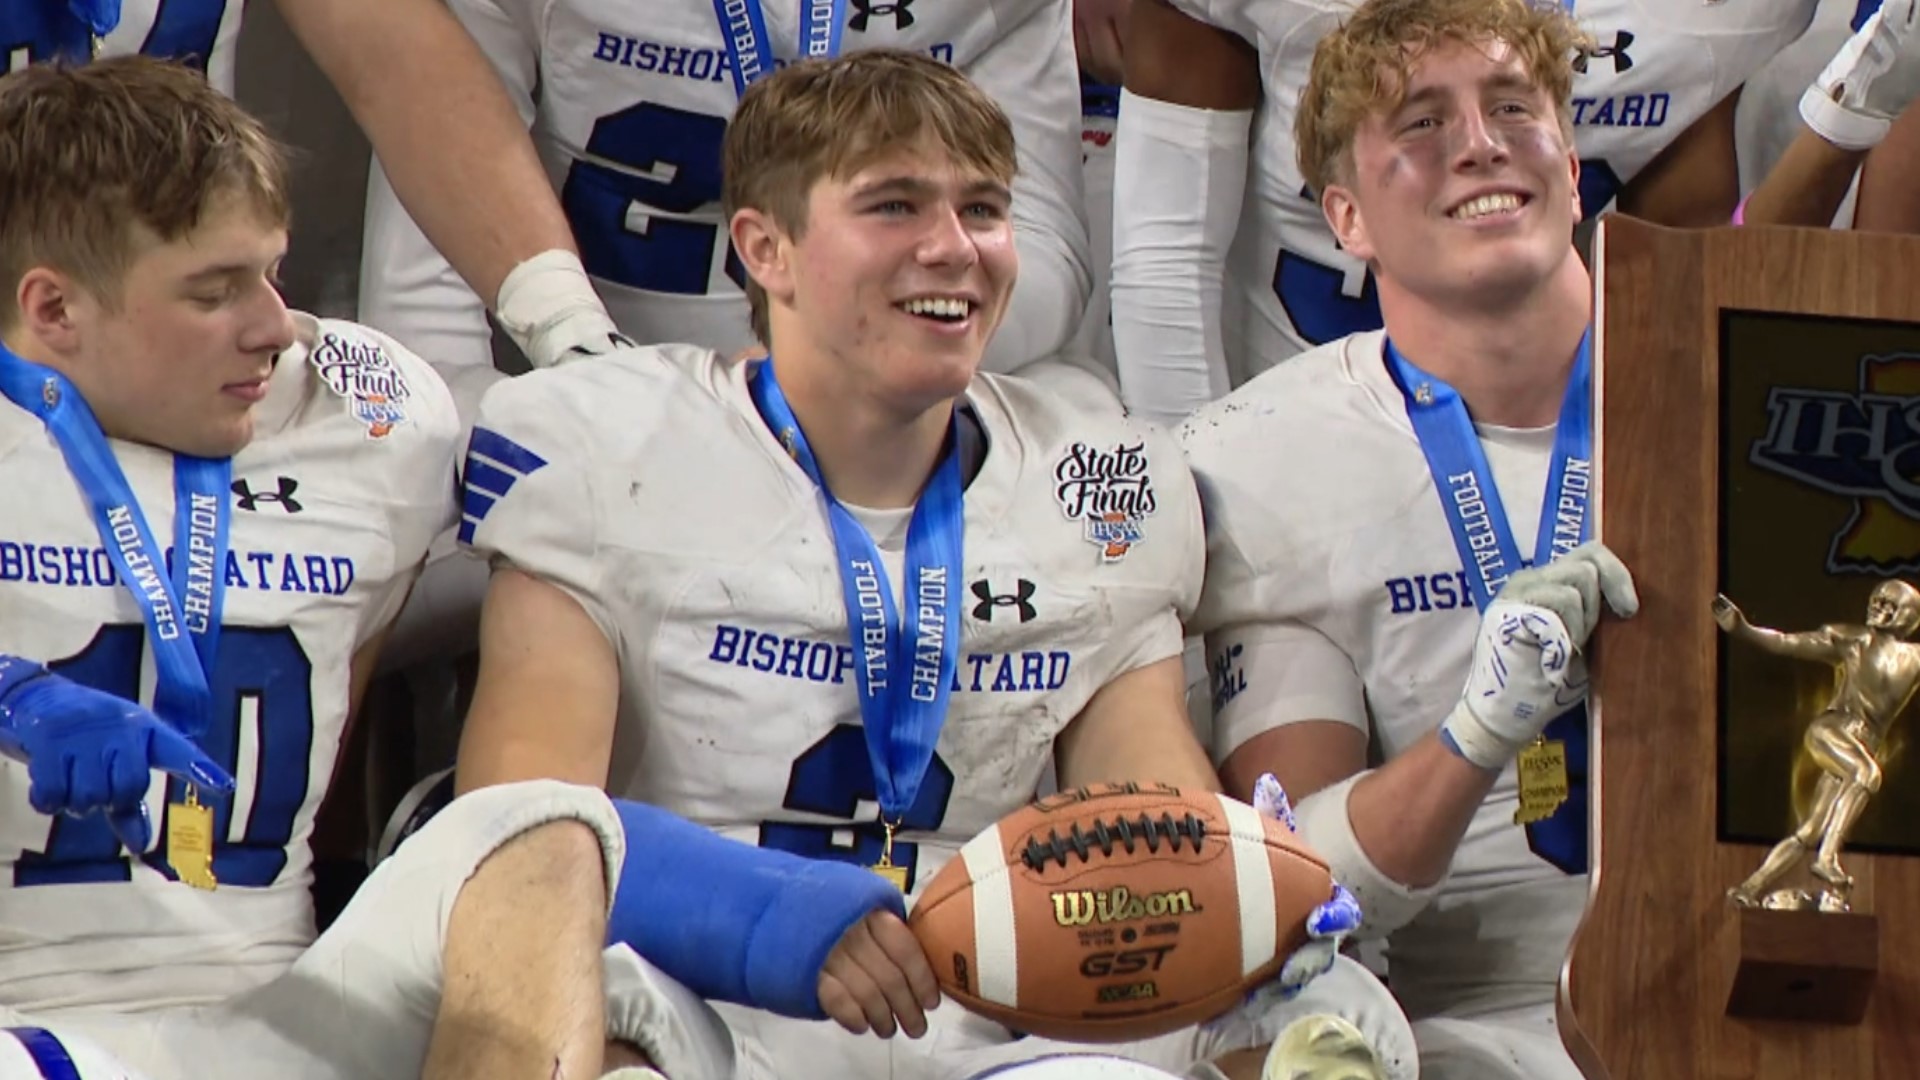 Senior running back Riley Kinnett battled through a setback to give Bishop Chatard its second straight Class 3A football championship.